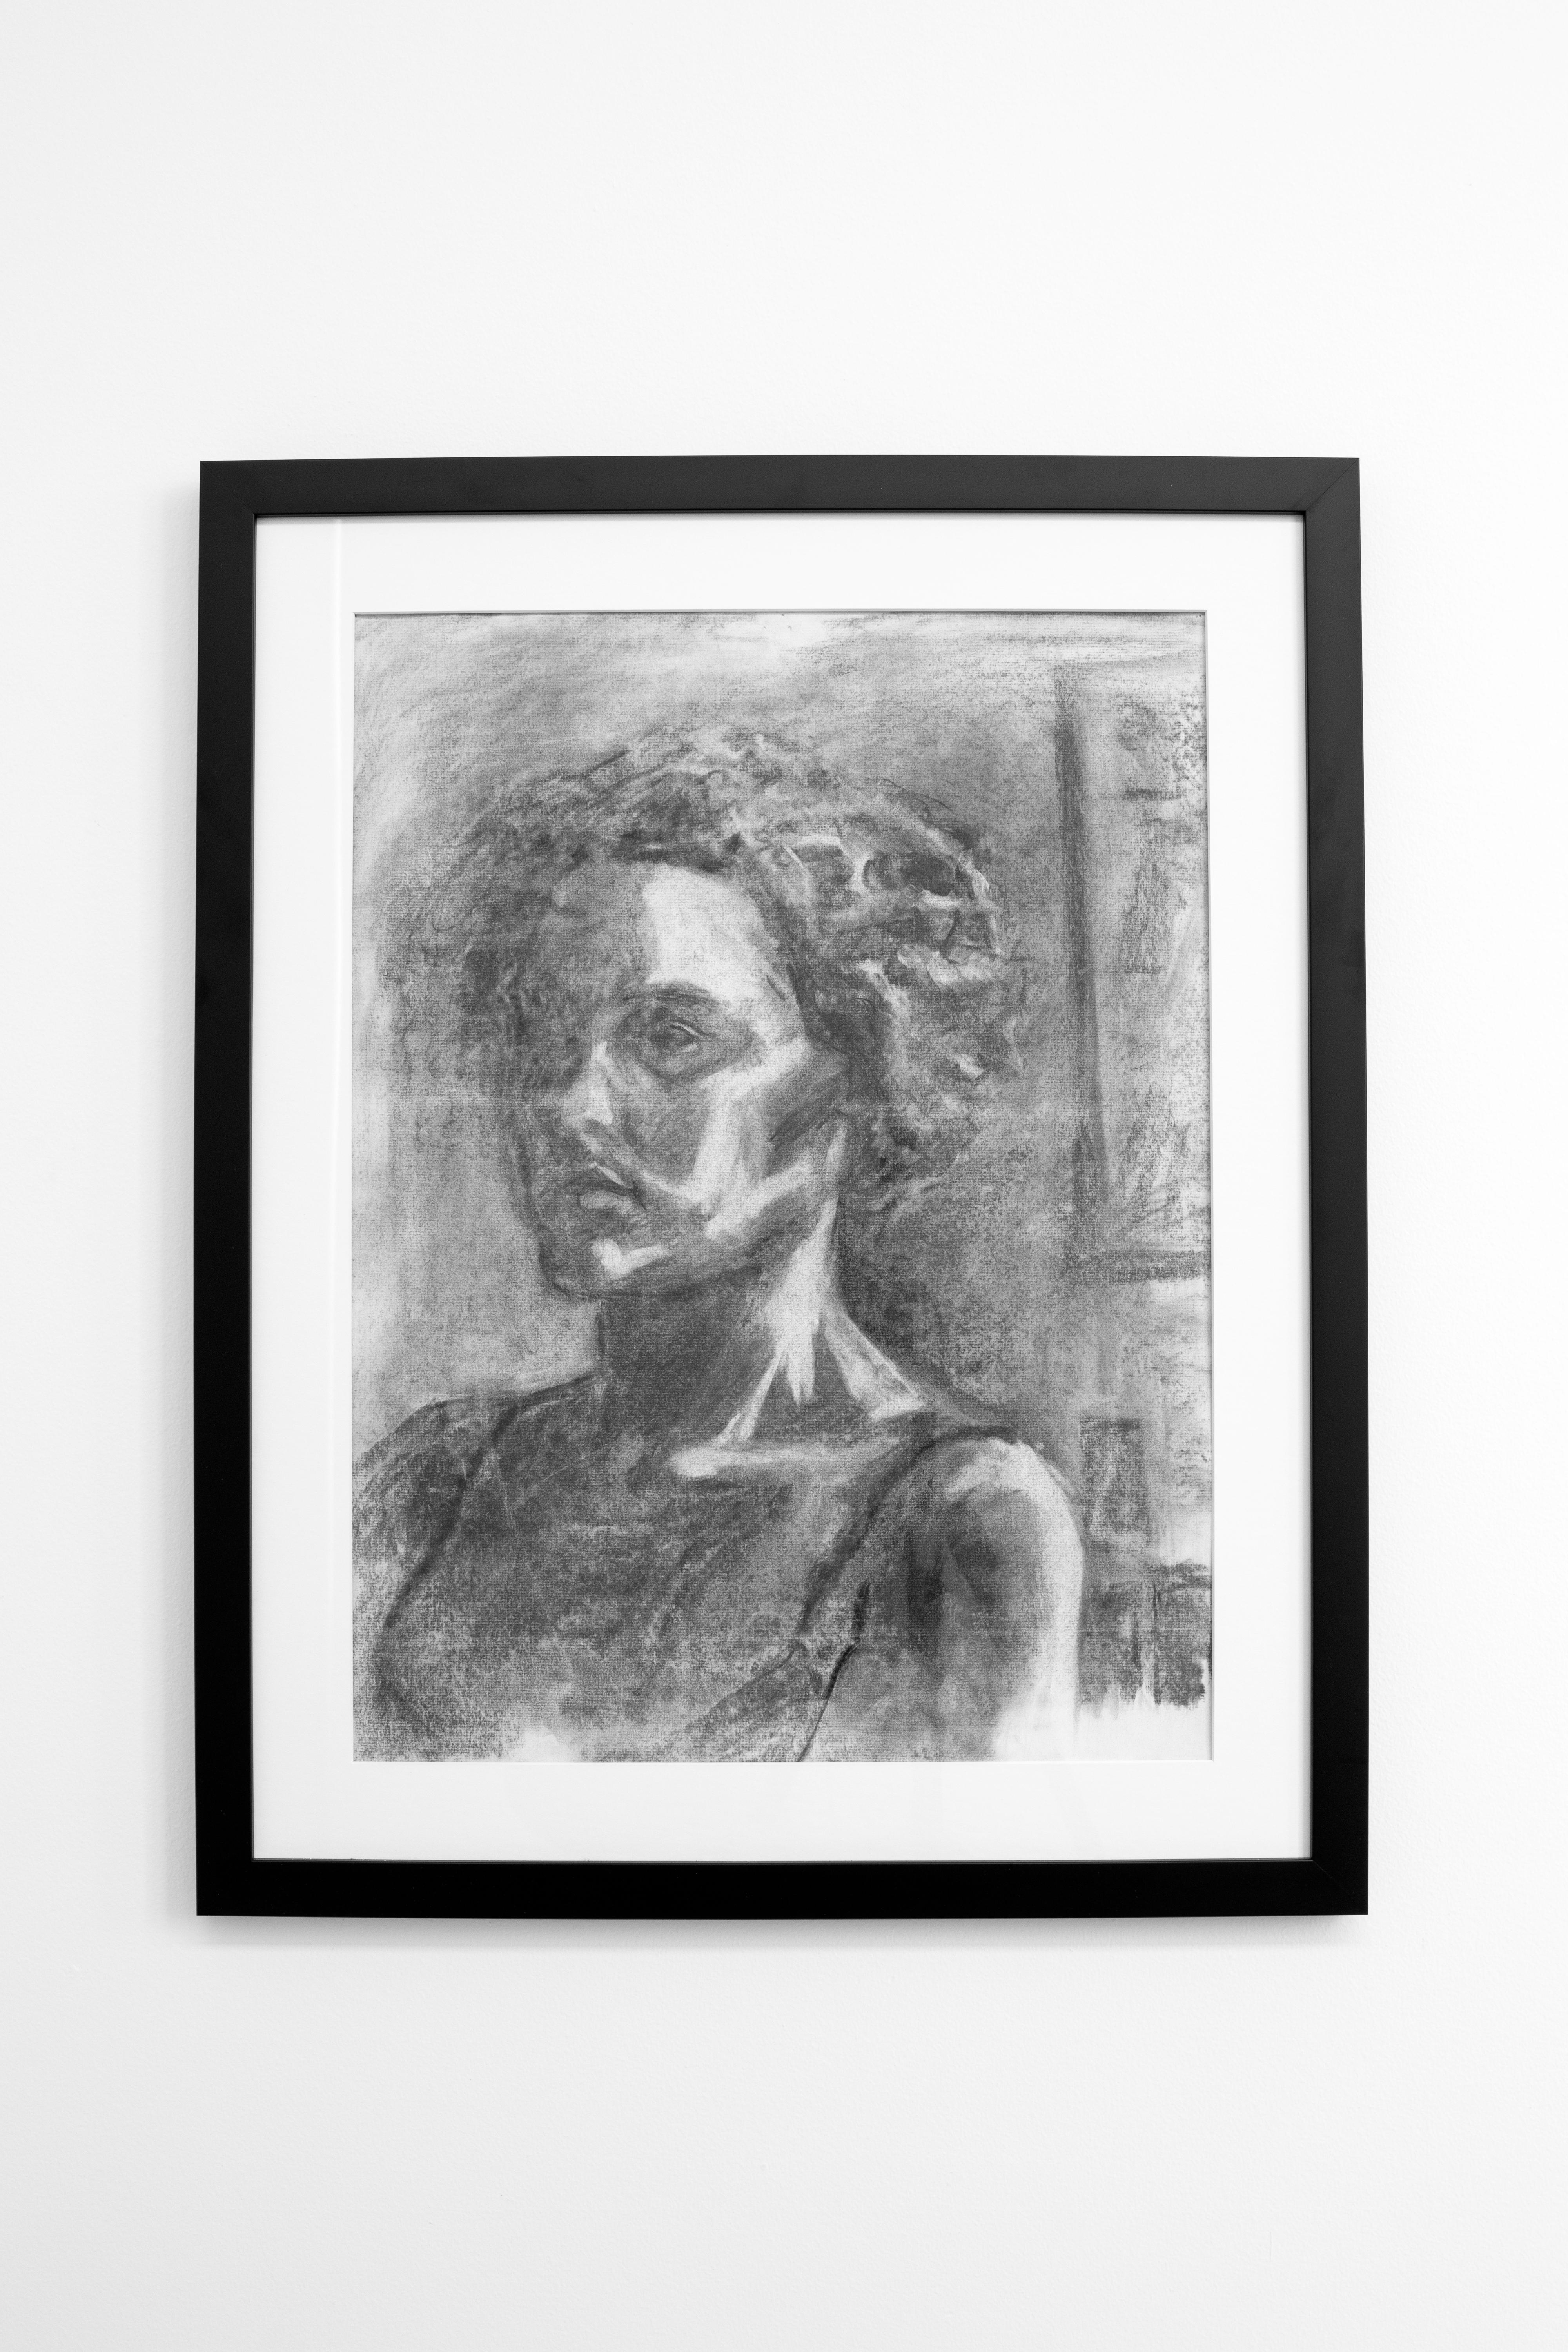 Framed Charcoal Drawing Portrait of a Woman - Art by Unknown